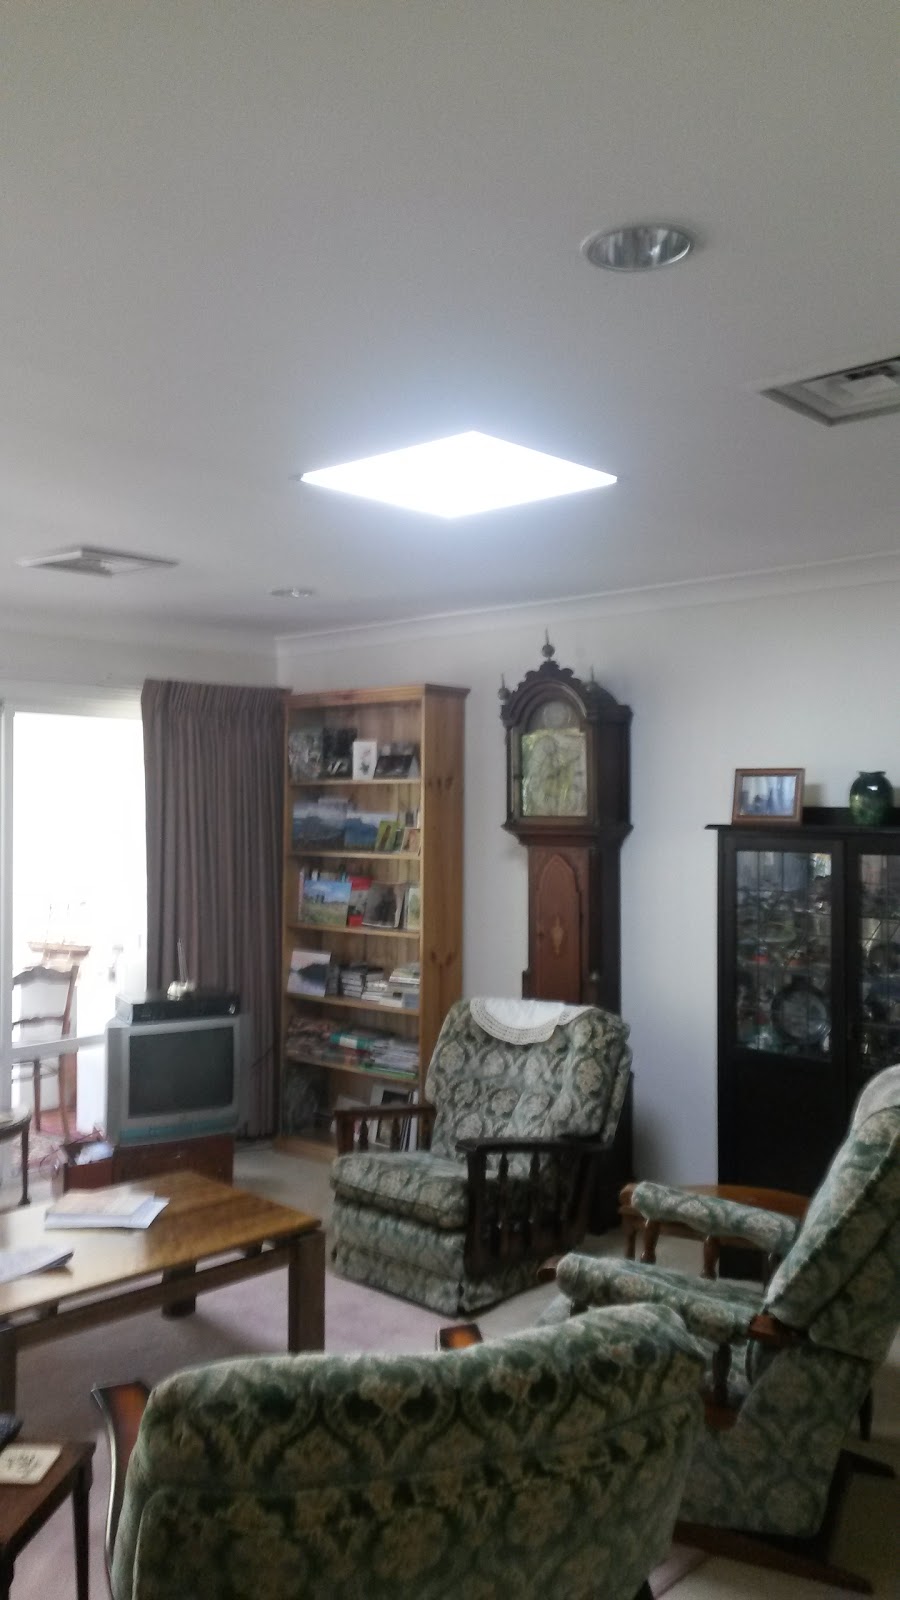 National skylights aust. Pty Ltd. | home goods store | 2/6 Johns Pl, Hume ACT 2620, Australia | 0415623732 OR +61 415 623 732